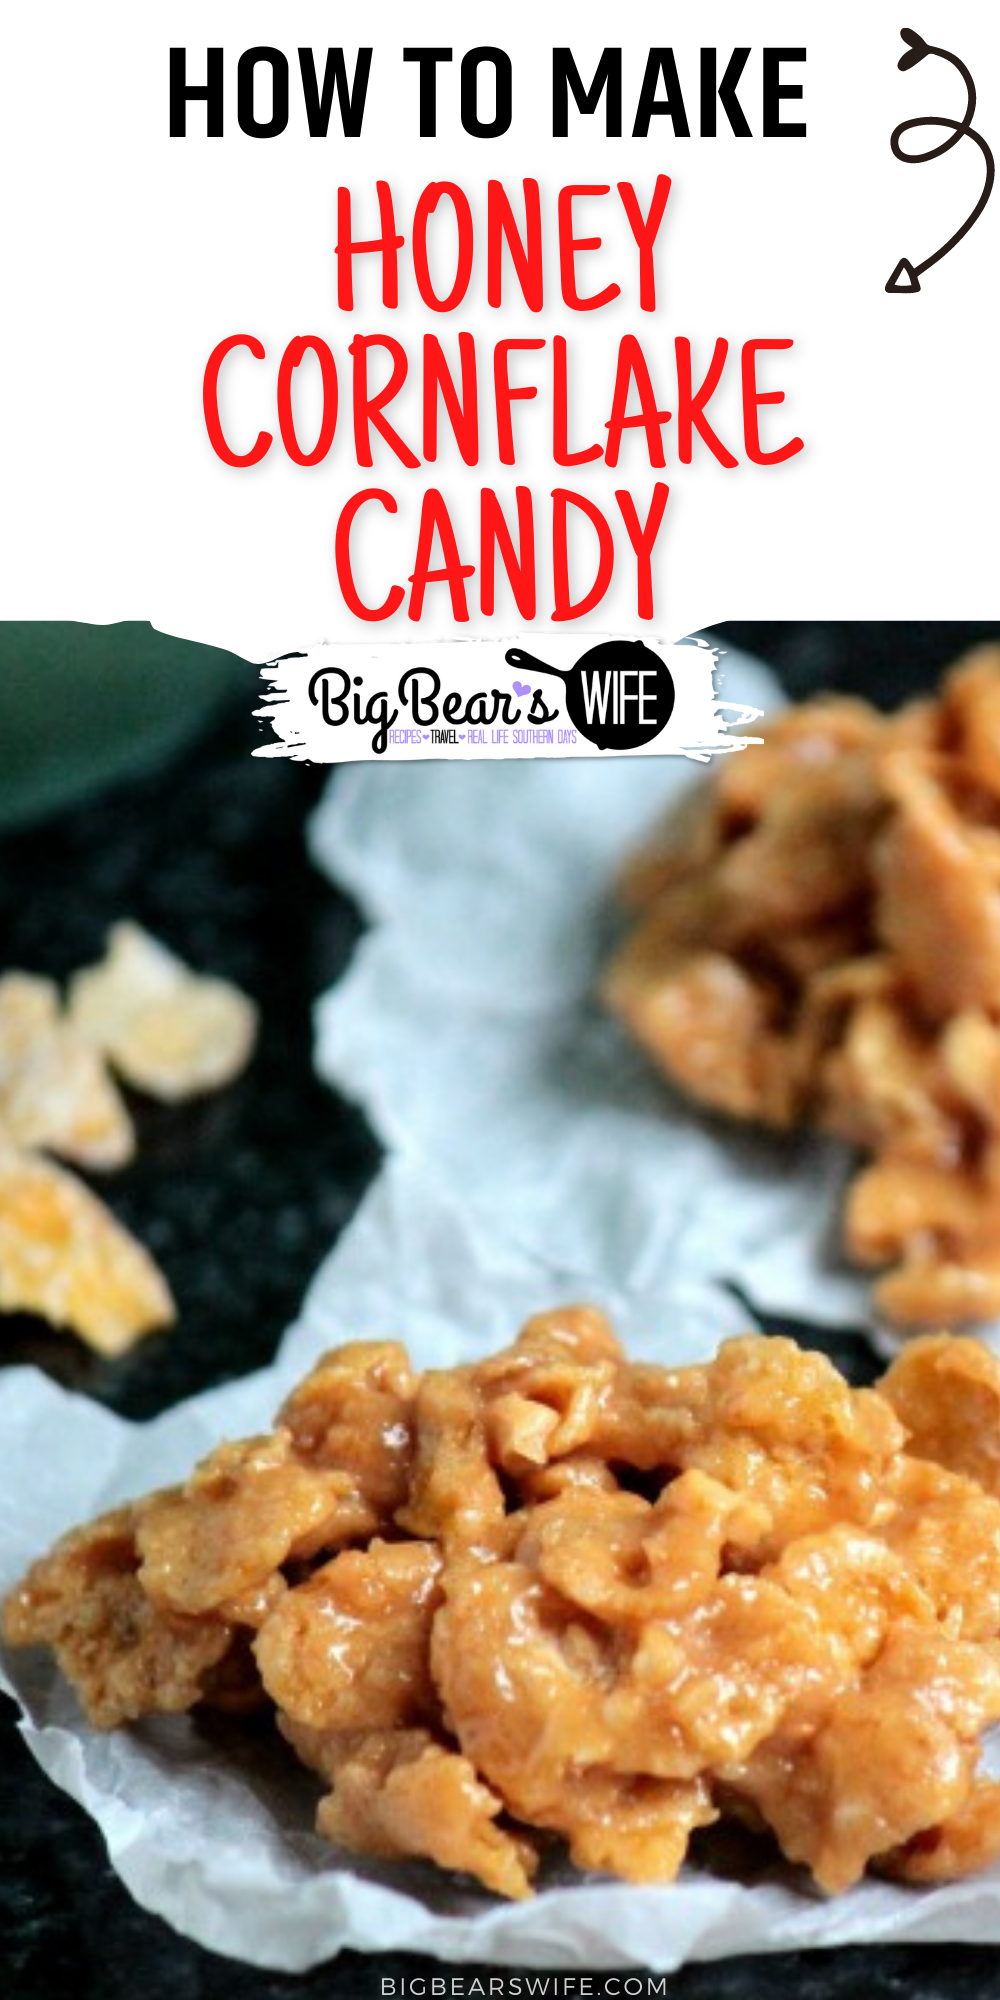 Honey Cornflake Candy - A classic southern candy with crunchy peanut butter and a sweet honey twist. via @bigbearswife